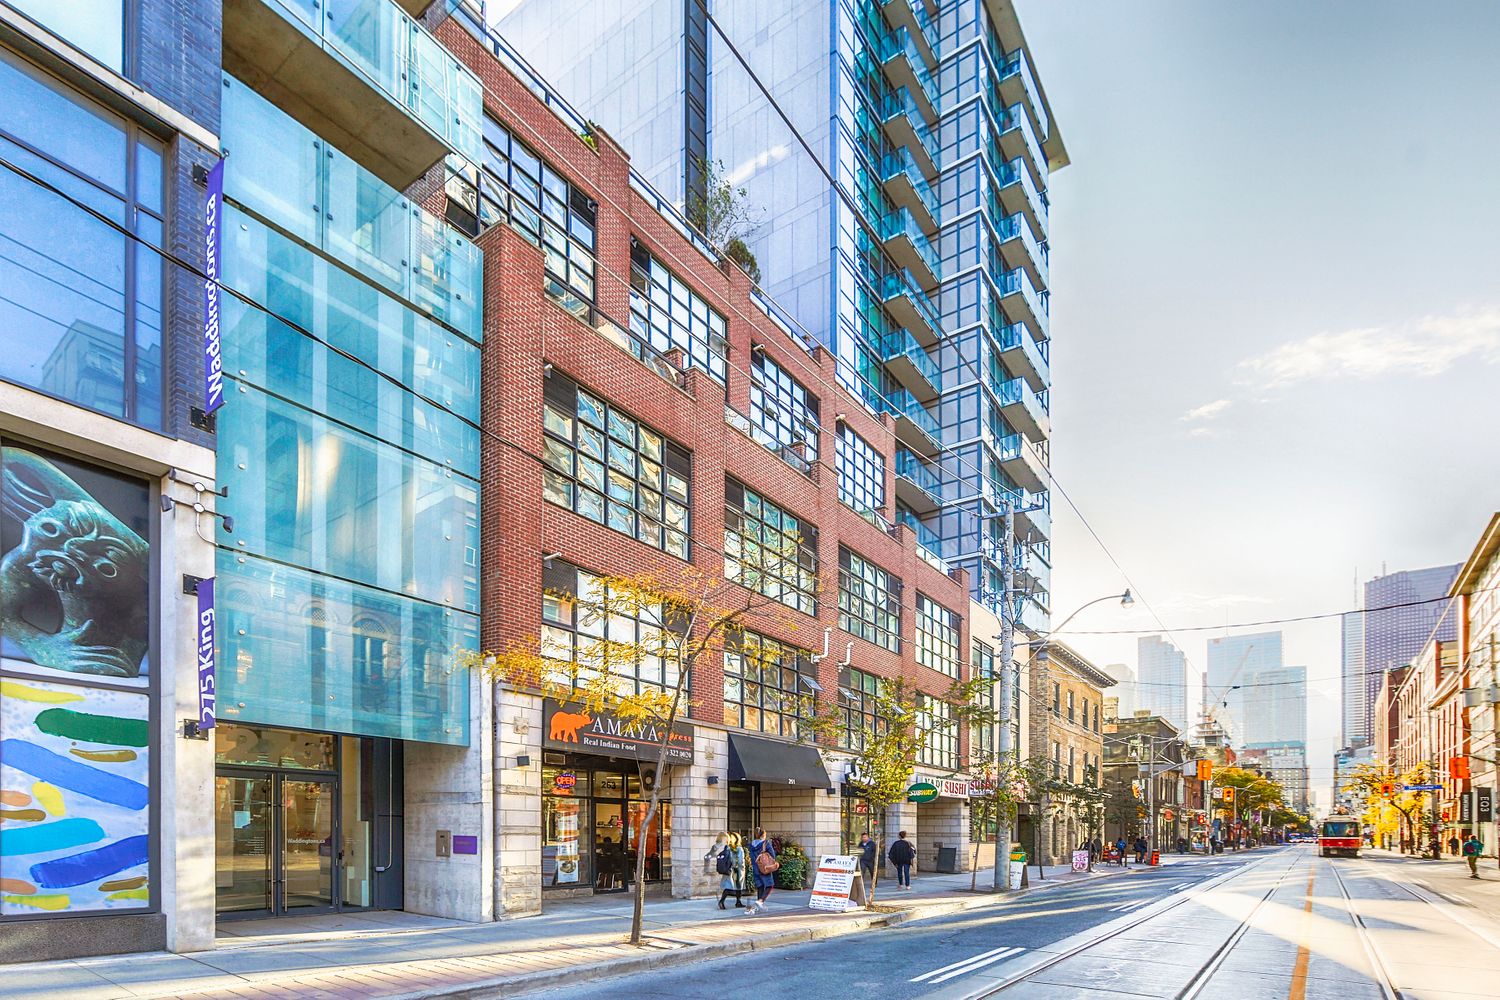 261 King Street E. Abbey Lane Lofts is located in  Downtown, Toronto - image #1 of 5